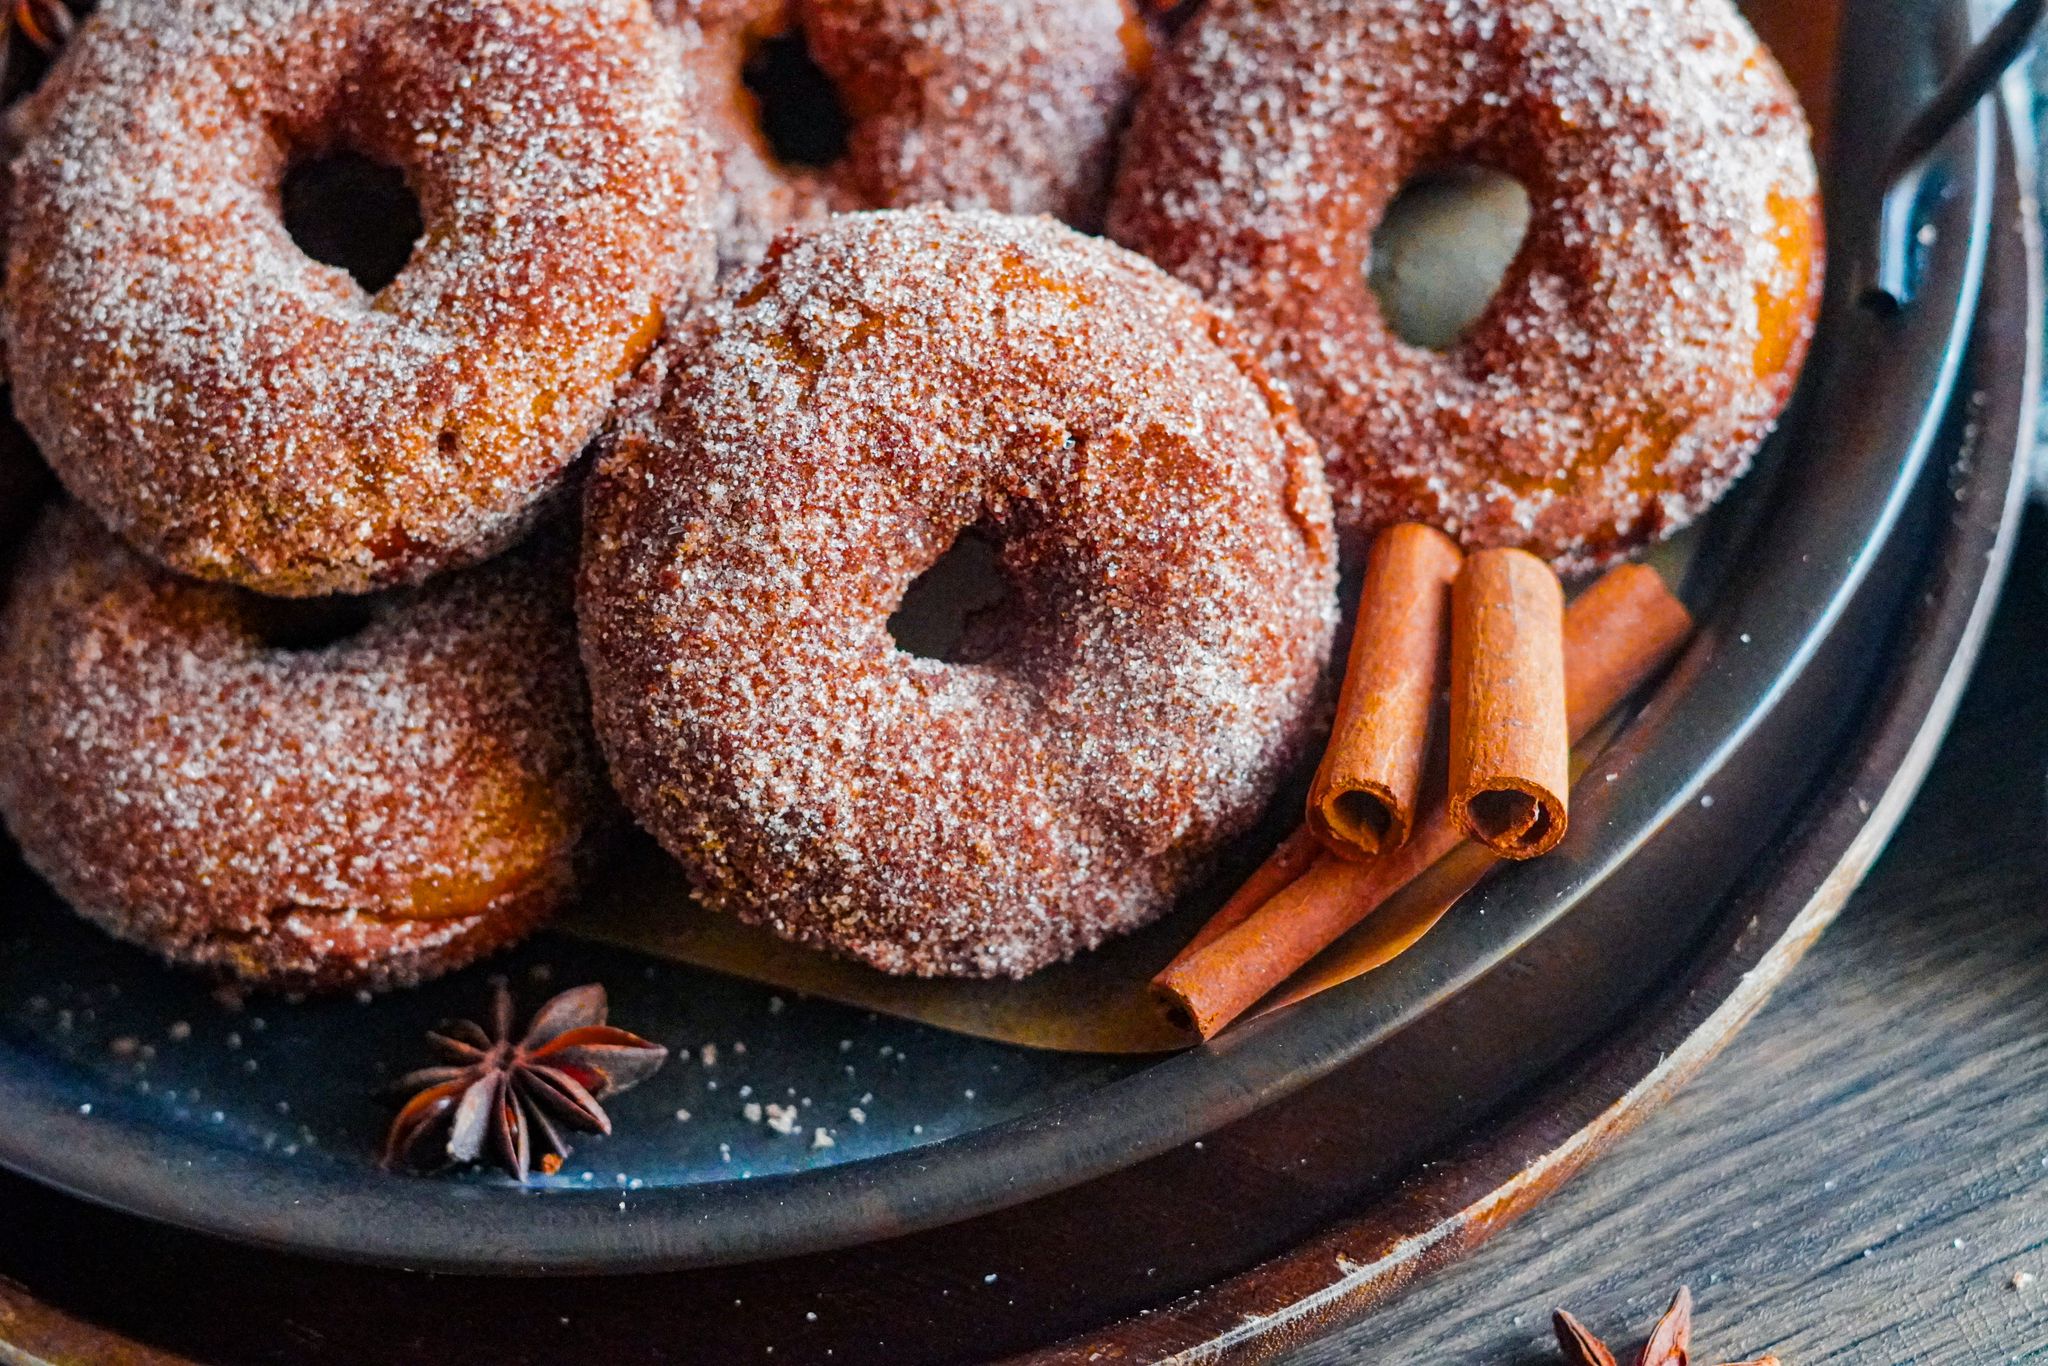 homemade donuts made with pumpkin with cinnamon sugar coating, next to them cinnamon sticks